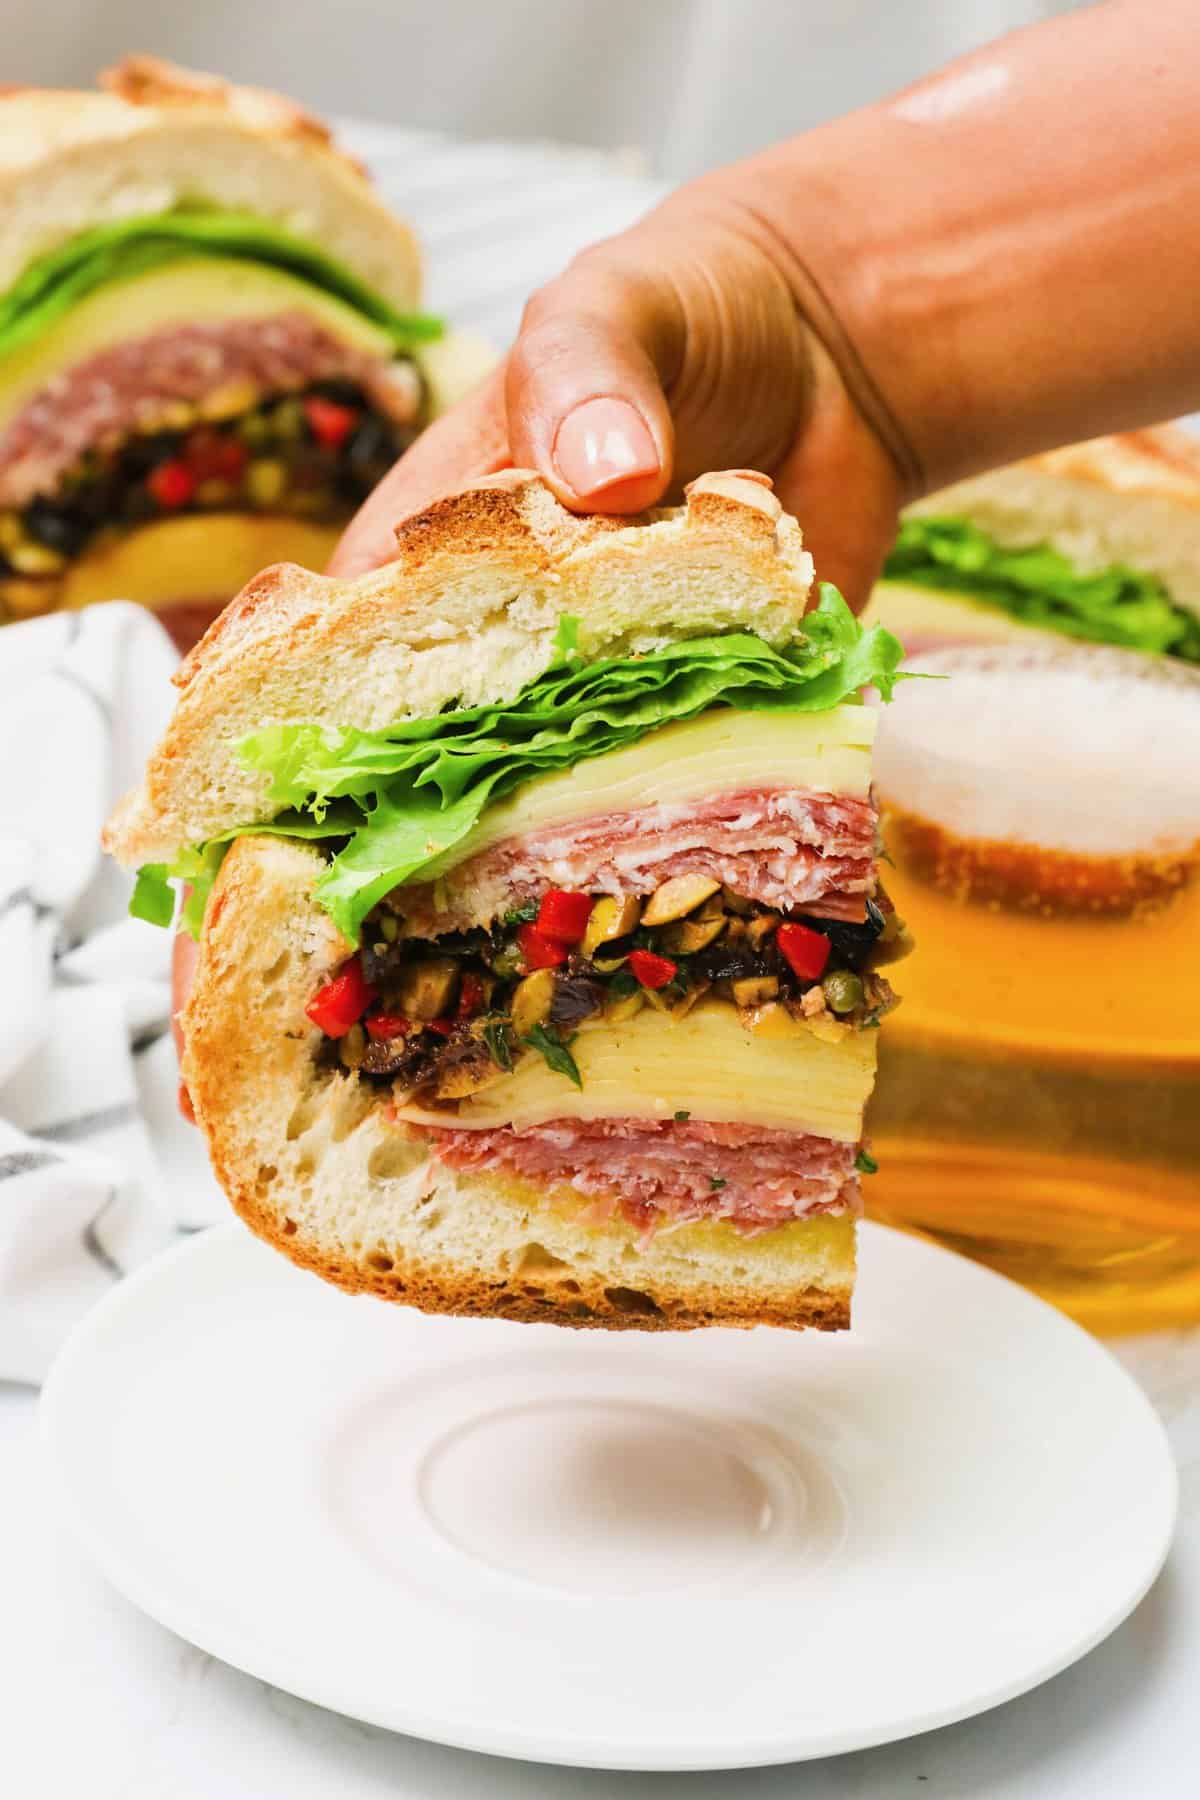 Dig into an insanely delicious muffuletta sandwich